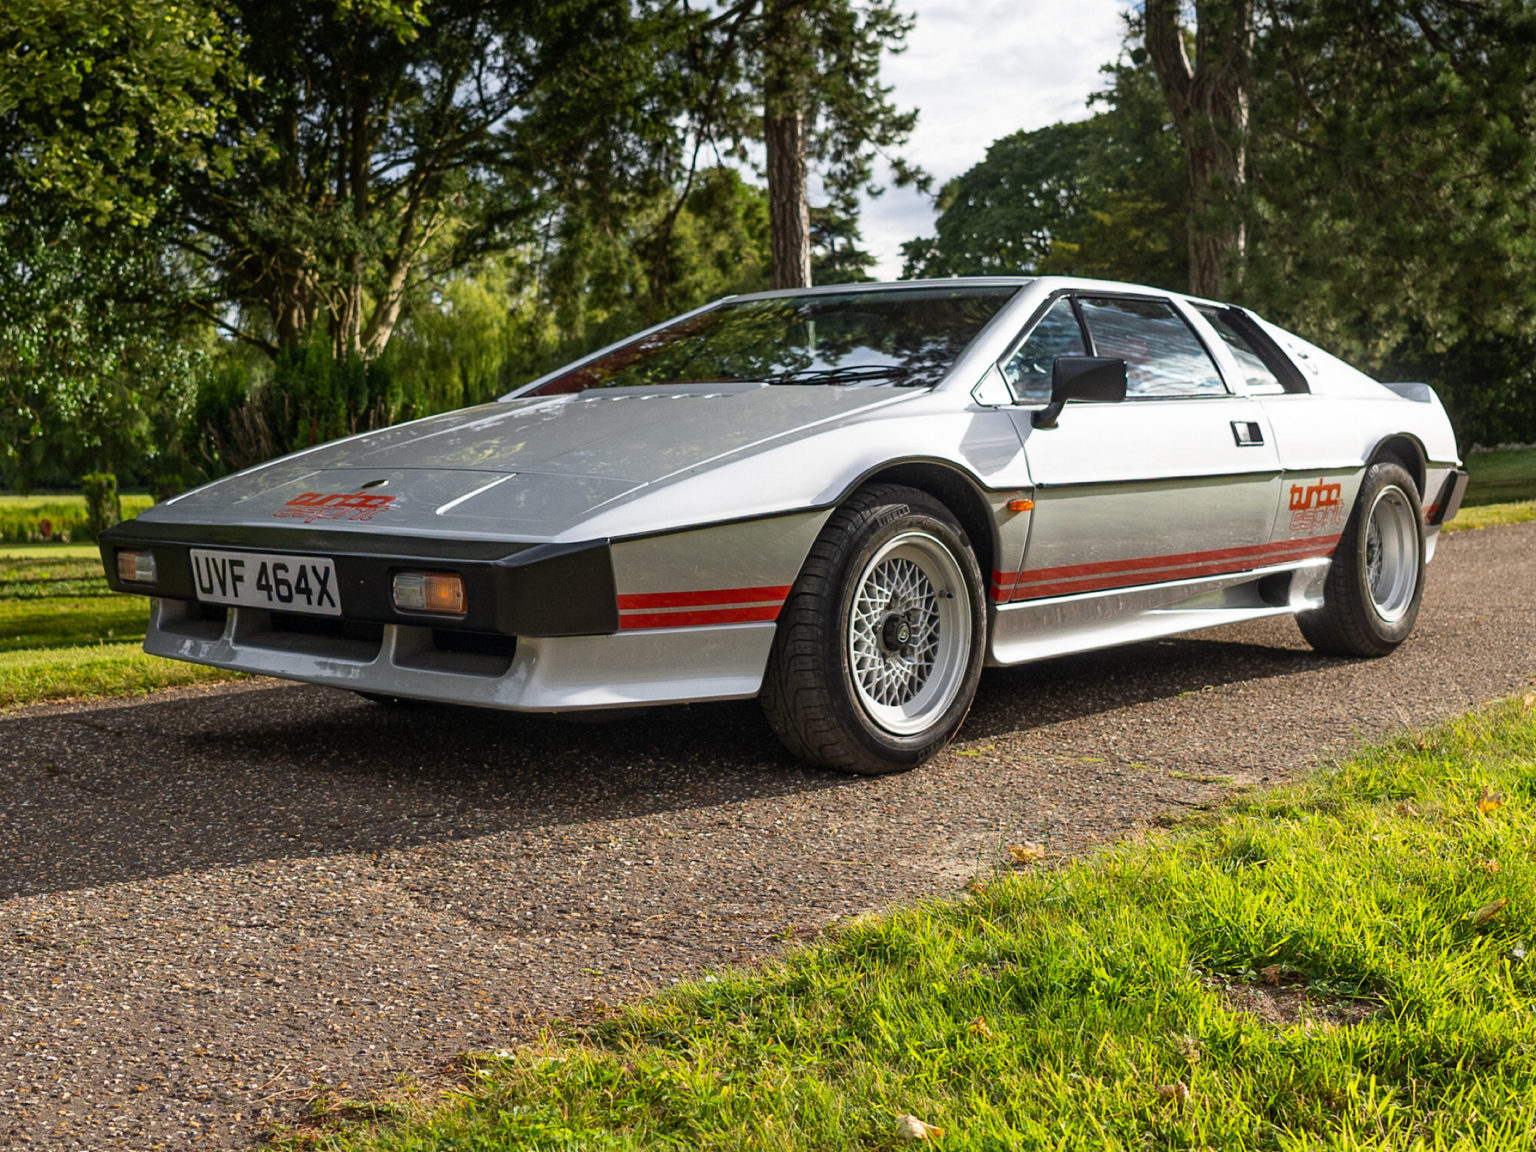 The 1981 Lotus Turbo Esprit pictured at Ketteringham Hall, Norfolk, where initial design and engineering development work on the original Esprit began in secret. The building was also home to 'Team Lotus' racing operations from the mid-1970s to 1994, and the Lotus GT race team from 1995-98.